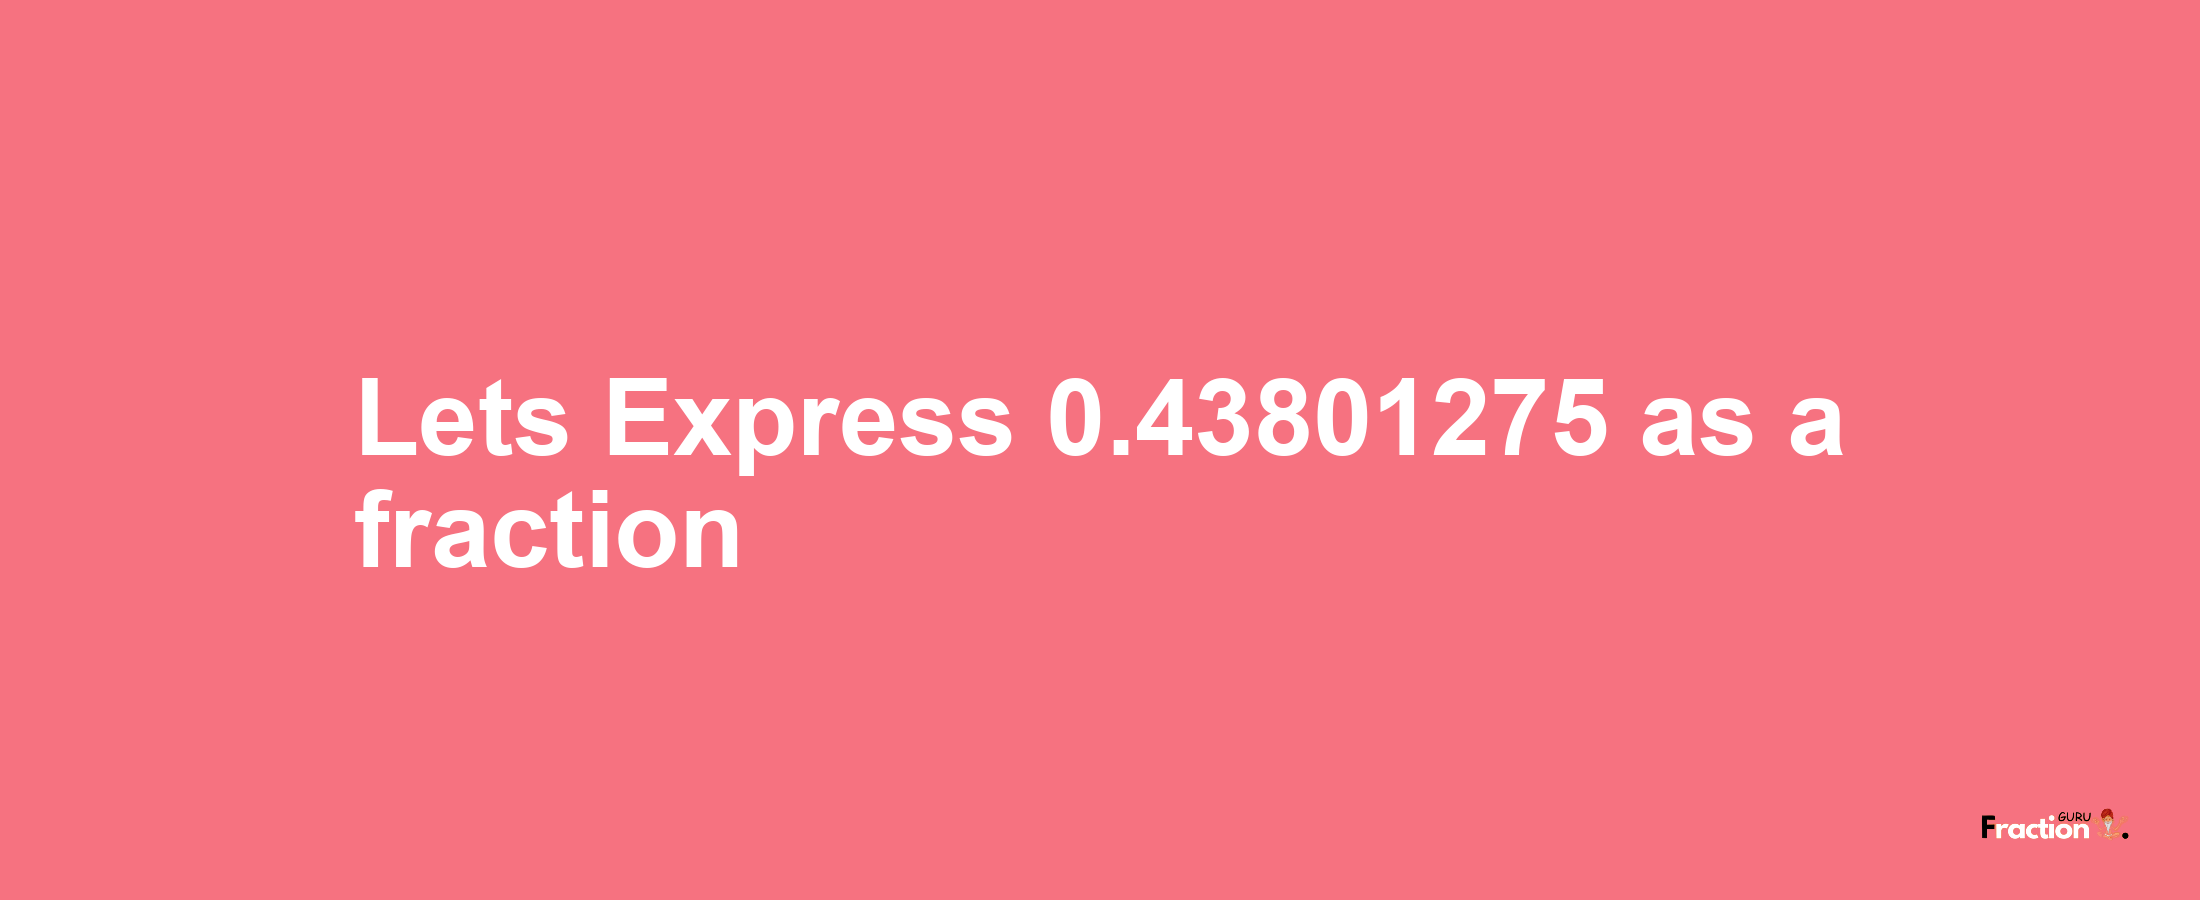 Lets Express 0.43801275 as afraction